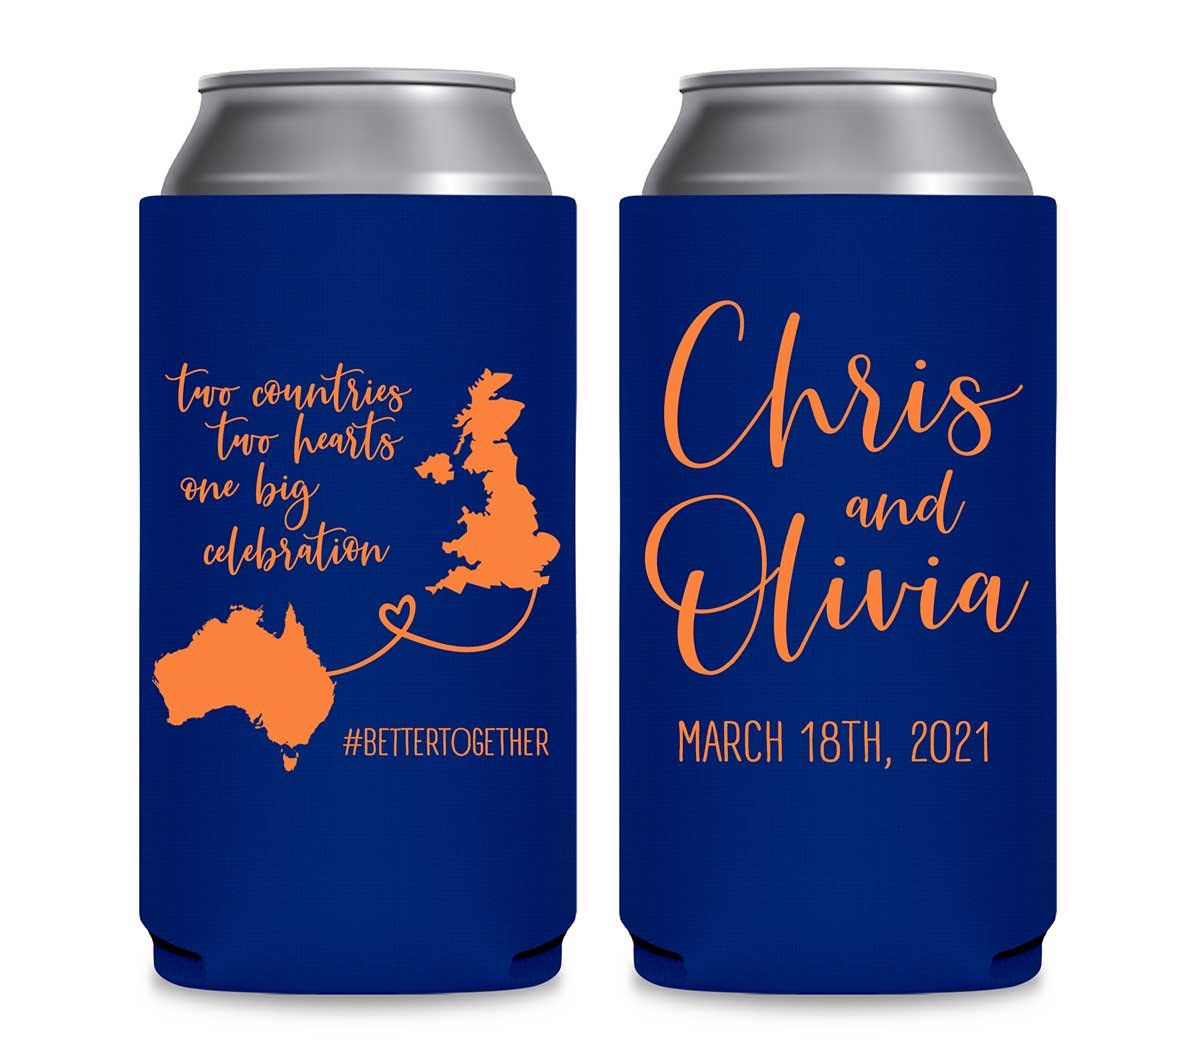 Two Countries Two Hearts One Big Celebration 1A Foldable 8.3 oz Slim Can Koozies Wedding Gifts for Guests